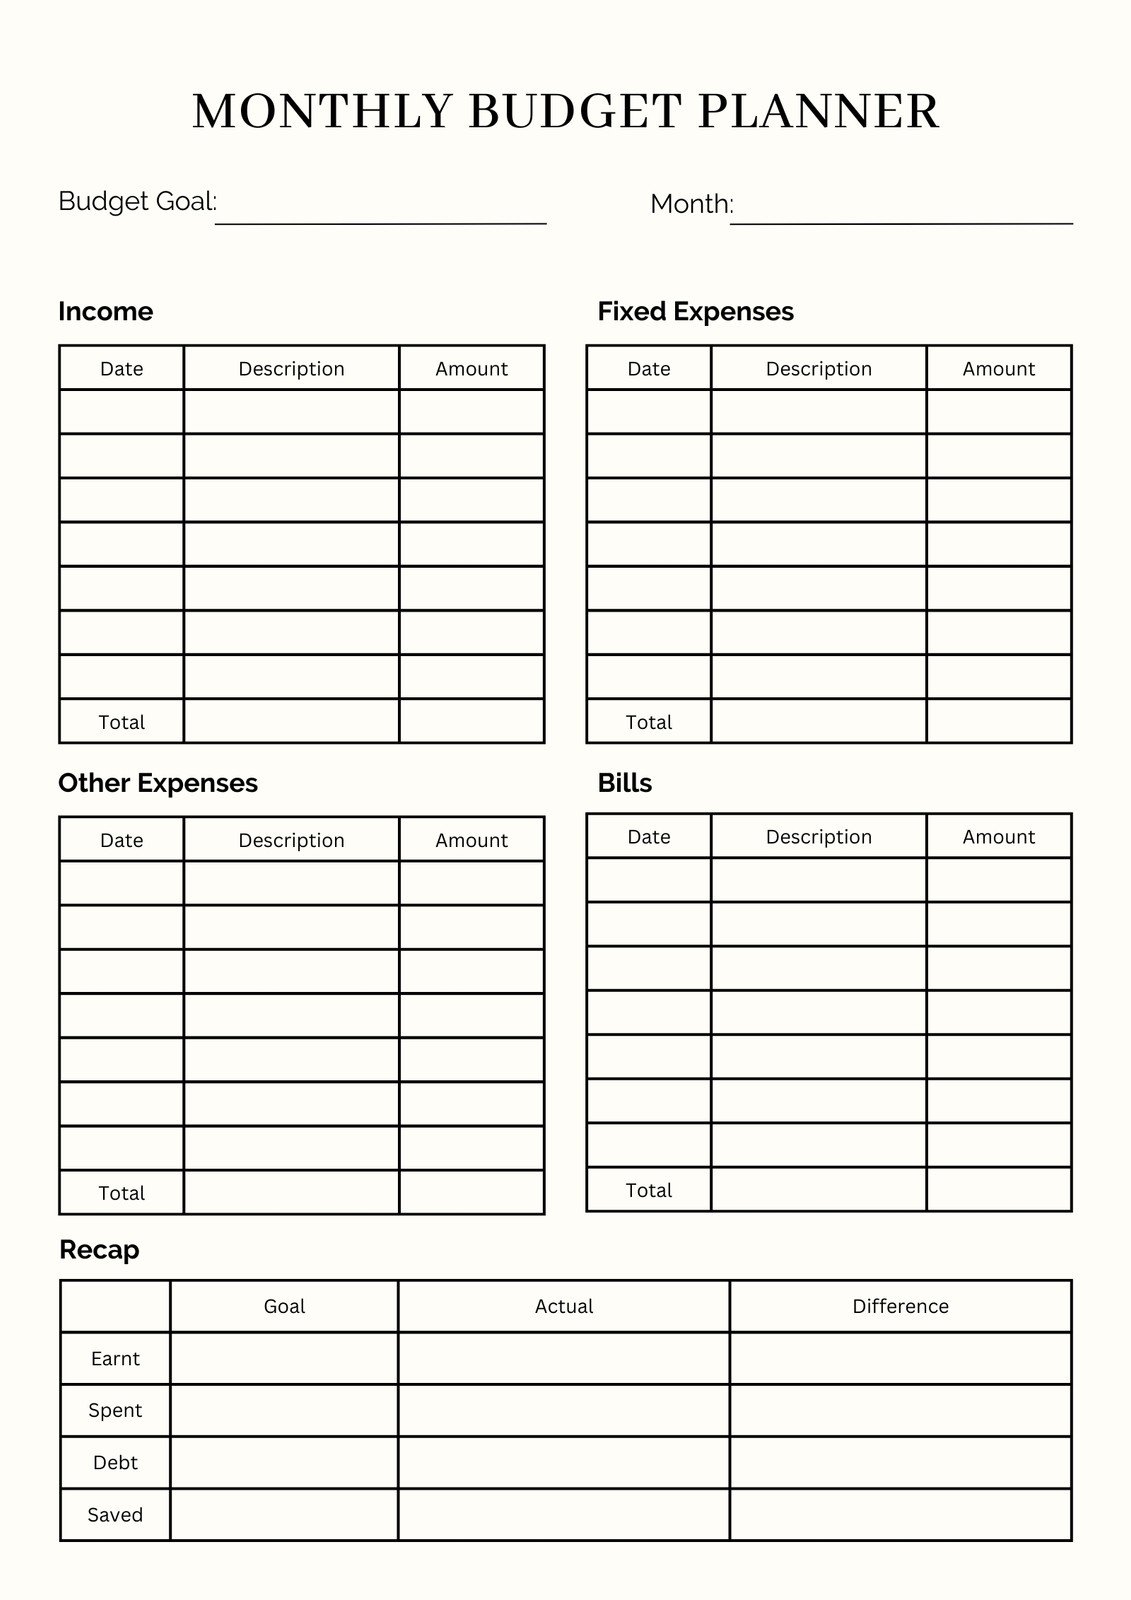 Monthly Budget Plan Free Budget Spreadsheet Template 46 OFF